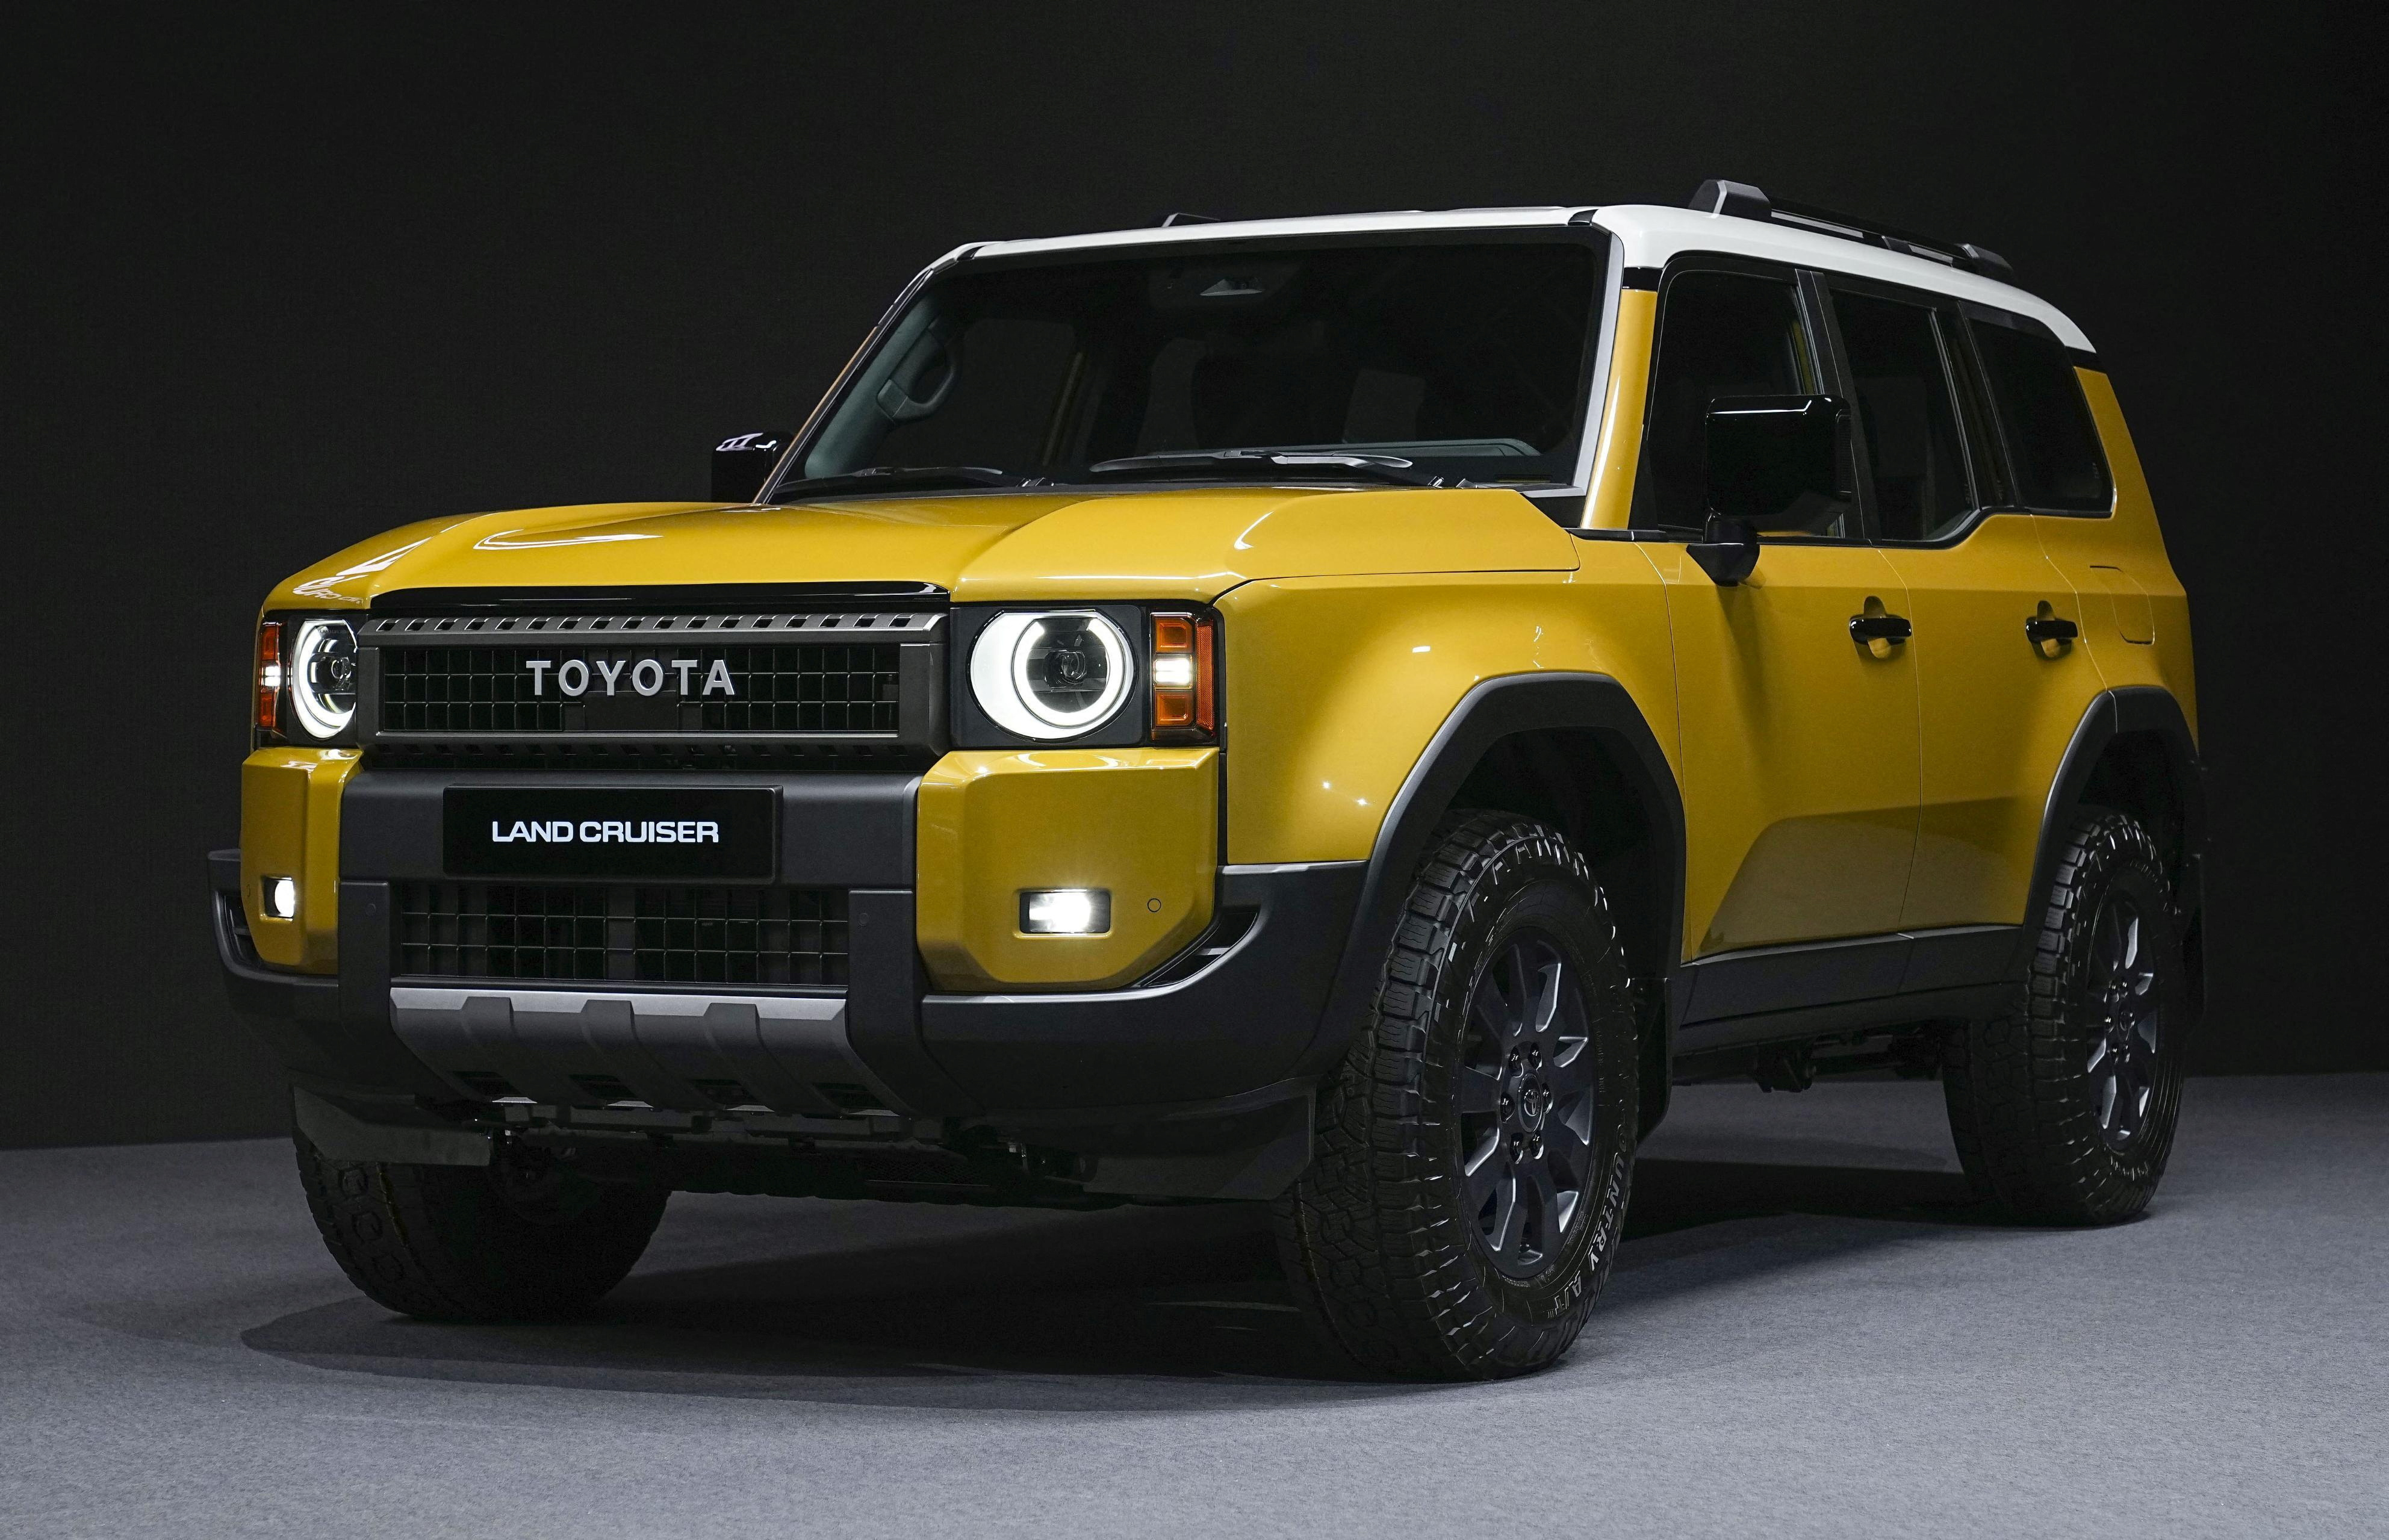 toyota revamps iconic land cruiser with hybrid version | reuters